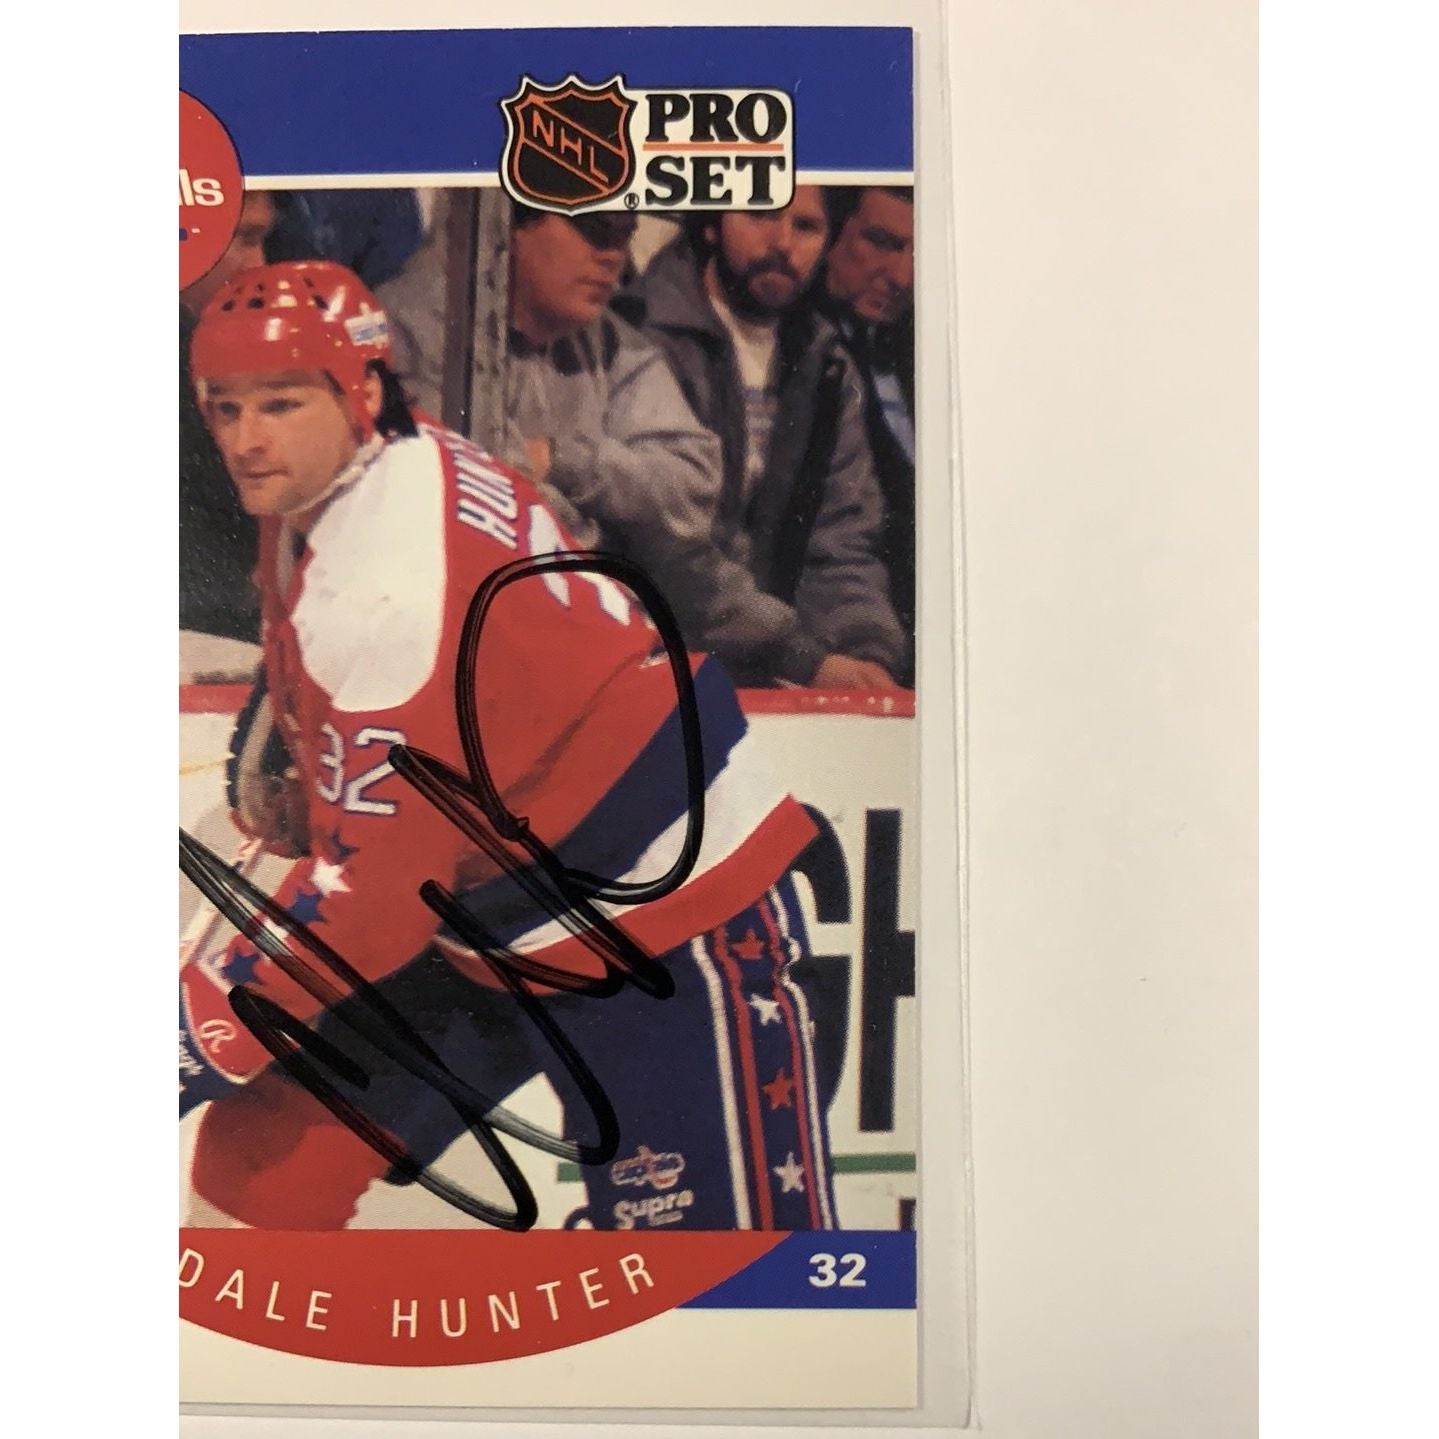  1990 Pro Set Dale Hunter In Person Auto  Local Legends Cards & Collectibles